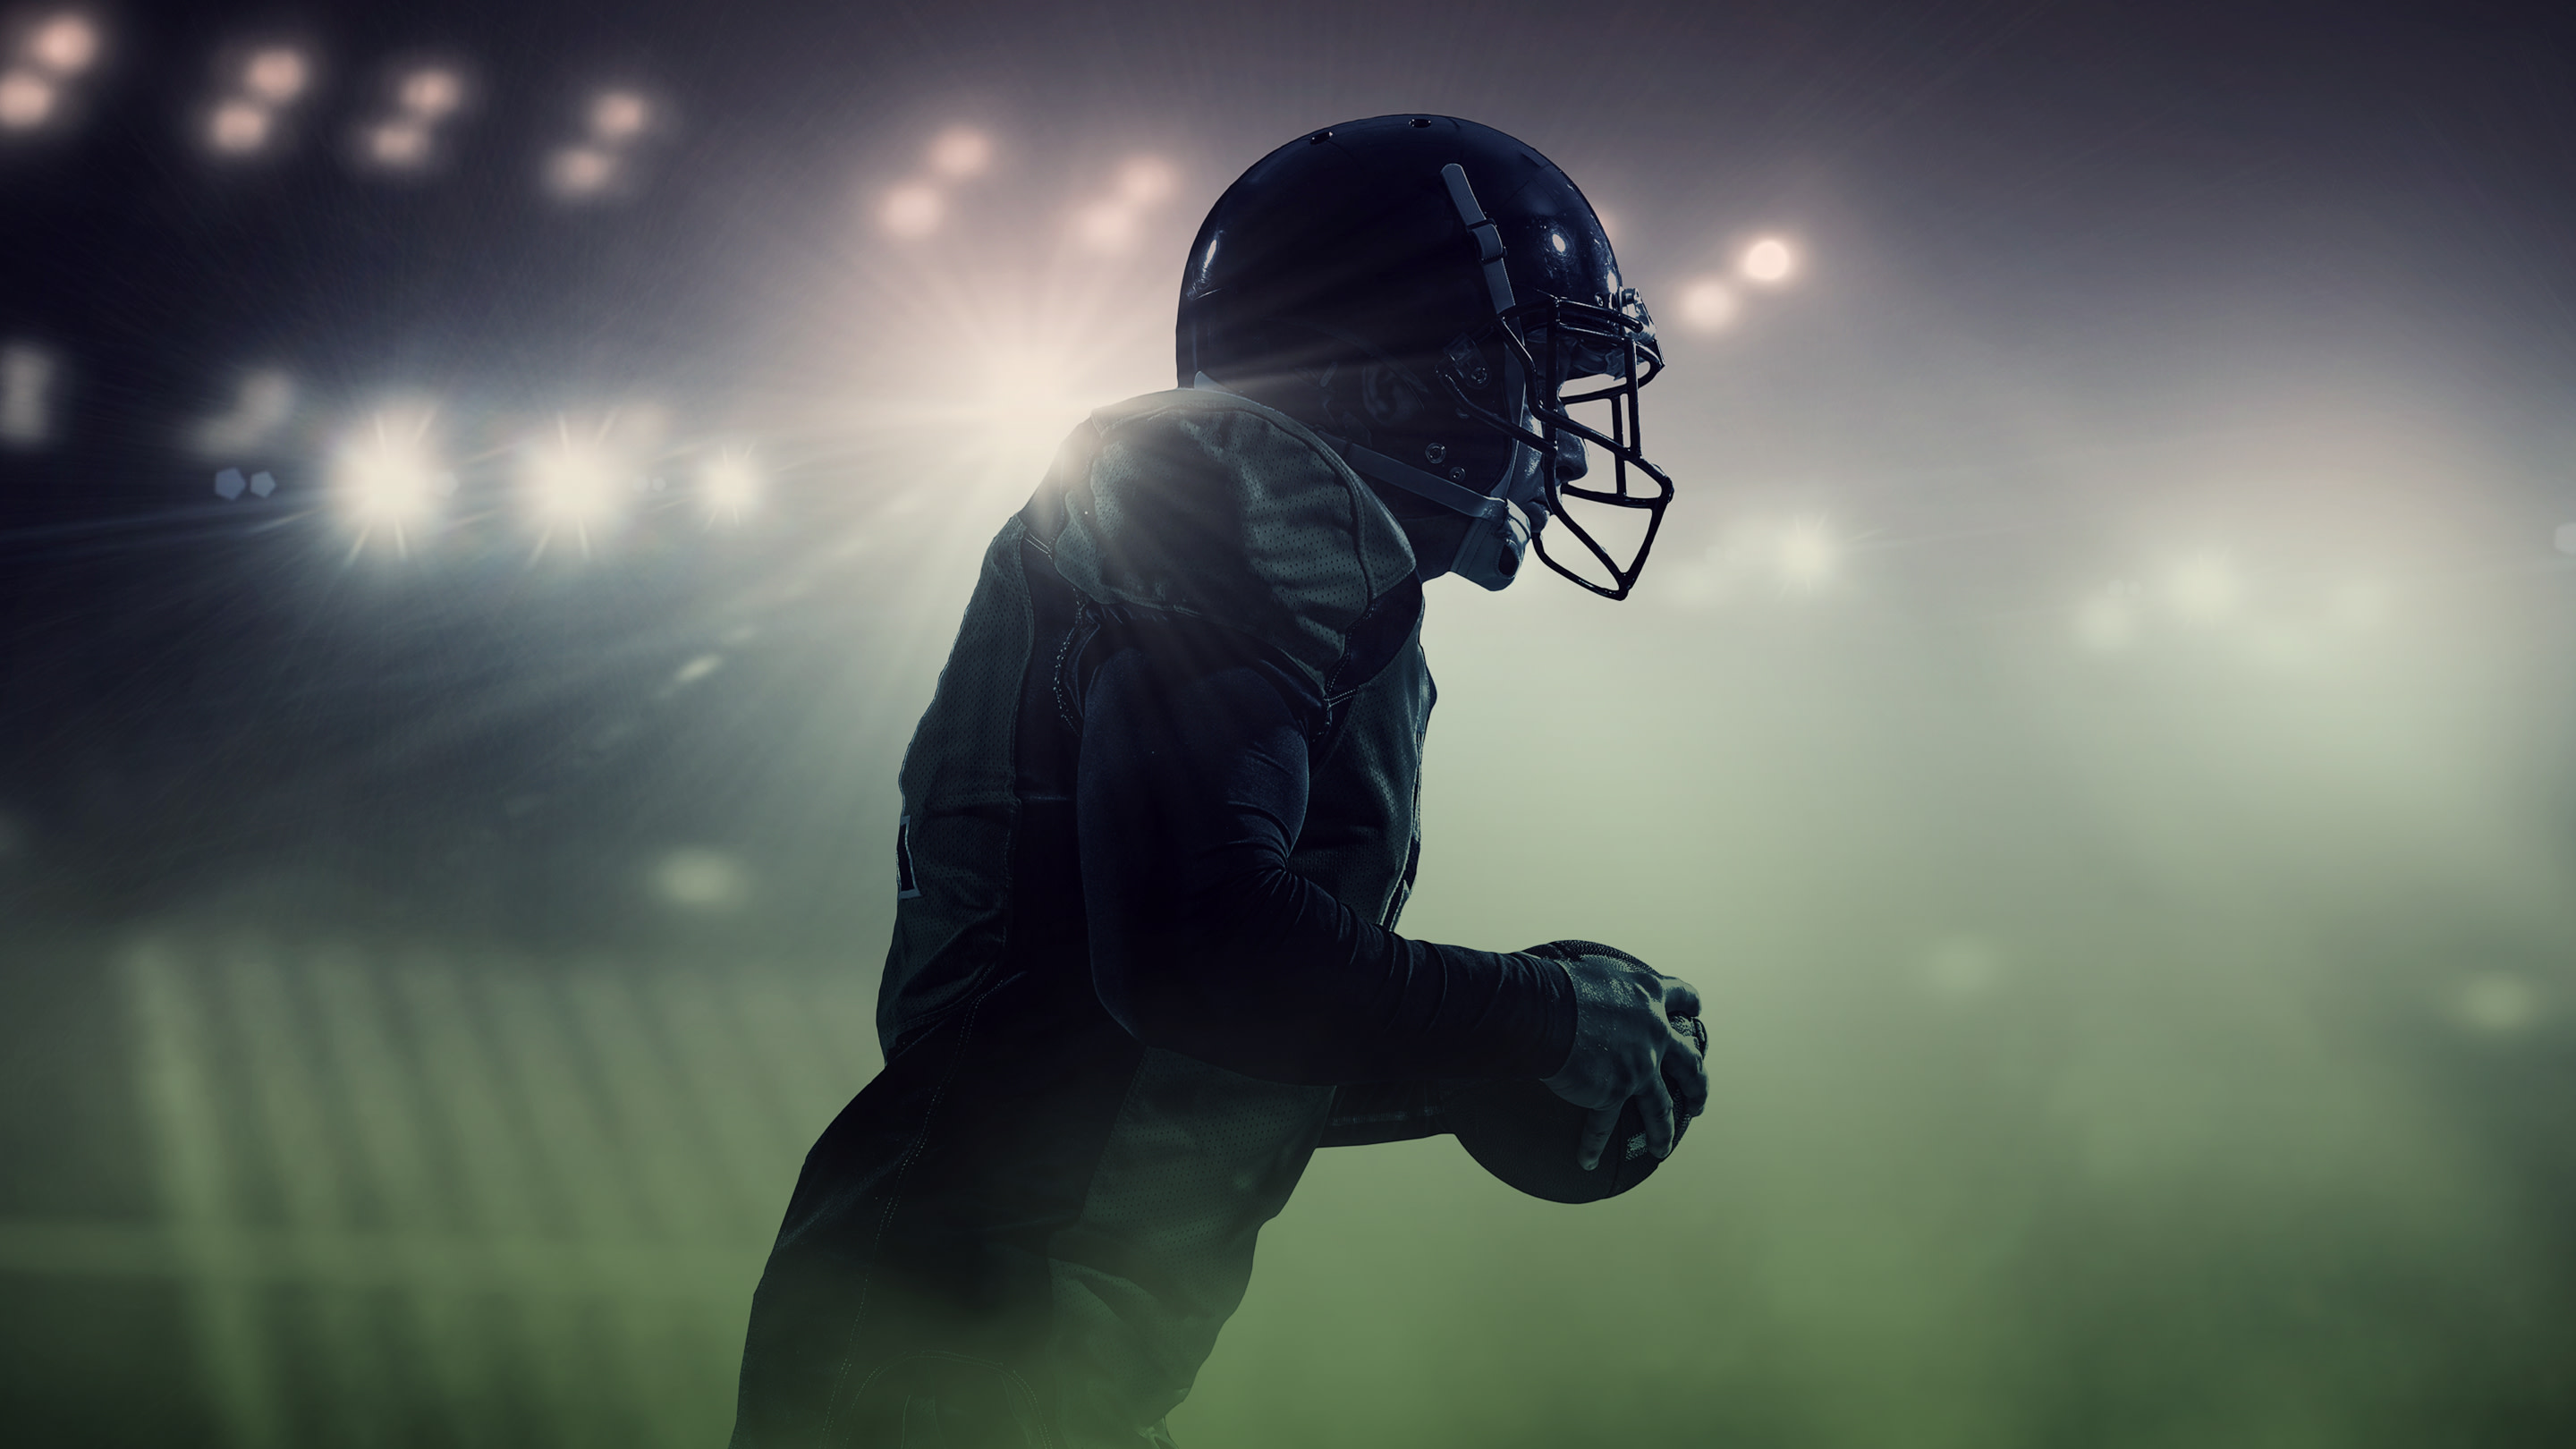 8 Former NFL Players Share Their Thoughts on Cannabis